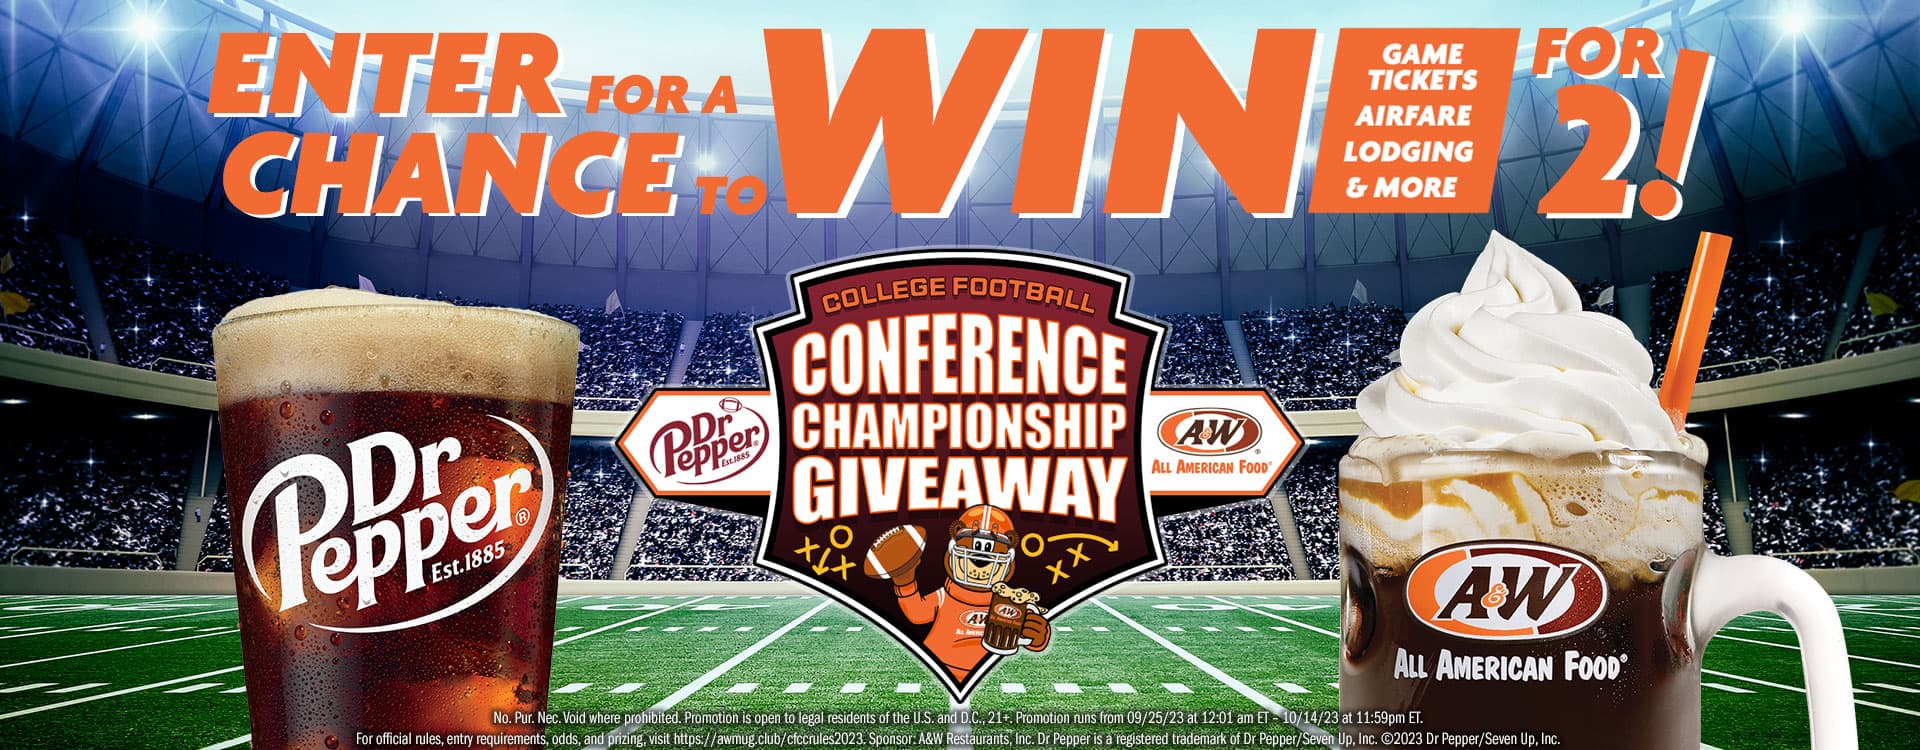 Dr Pepper Football Conference Championship Giveaway